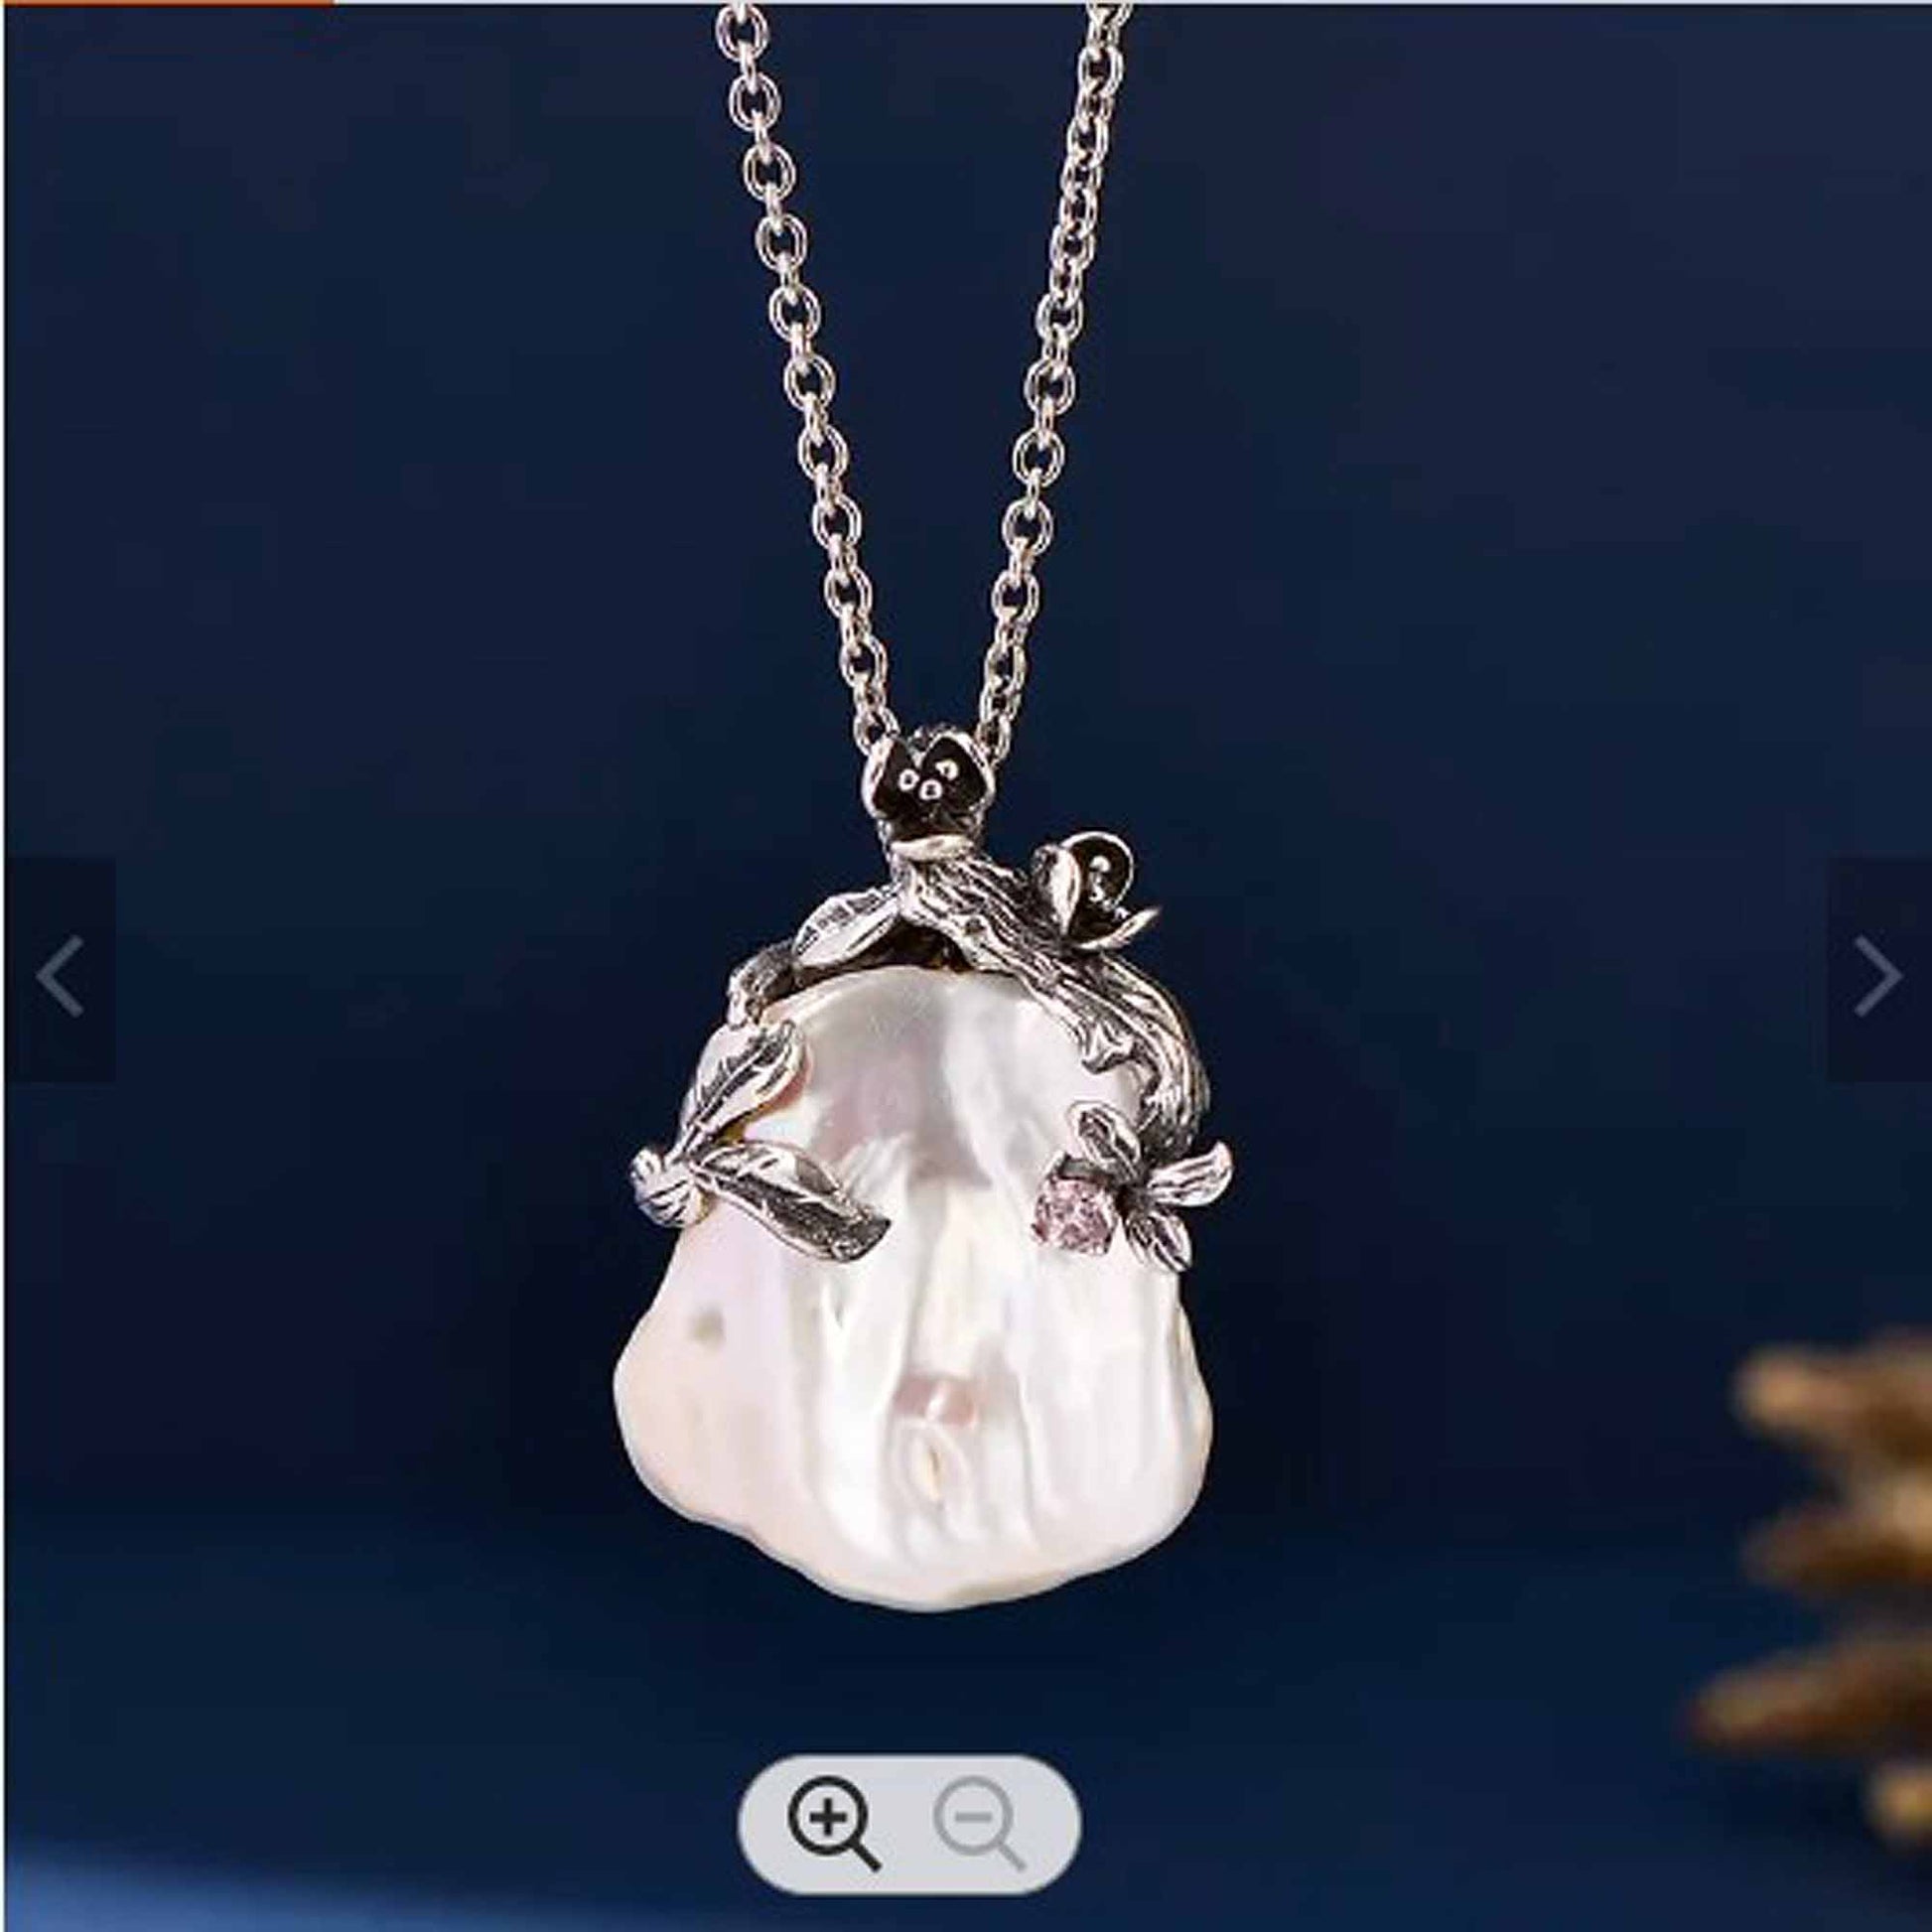 Designer style in a Baroque Pearl pendant set in Sterling Silver-Wholesale - Providence silver gold jewelry usa